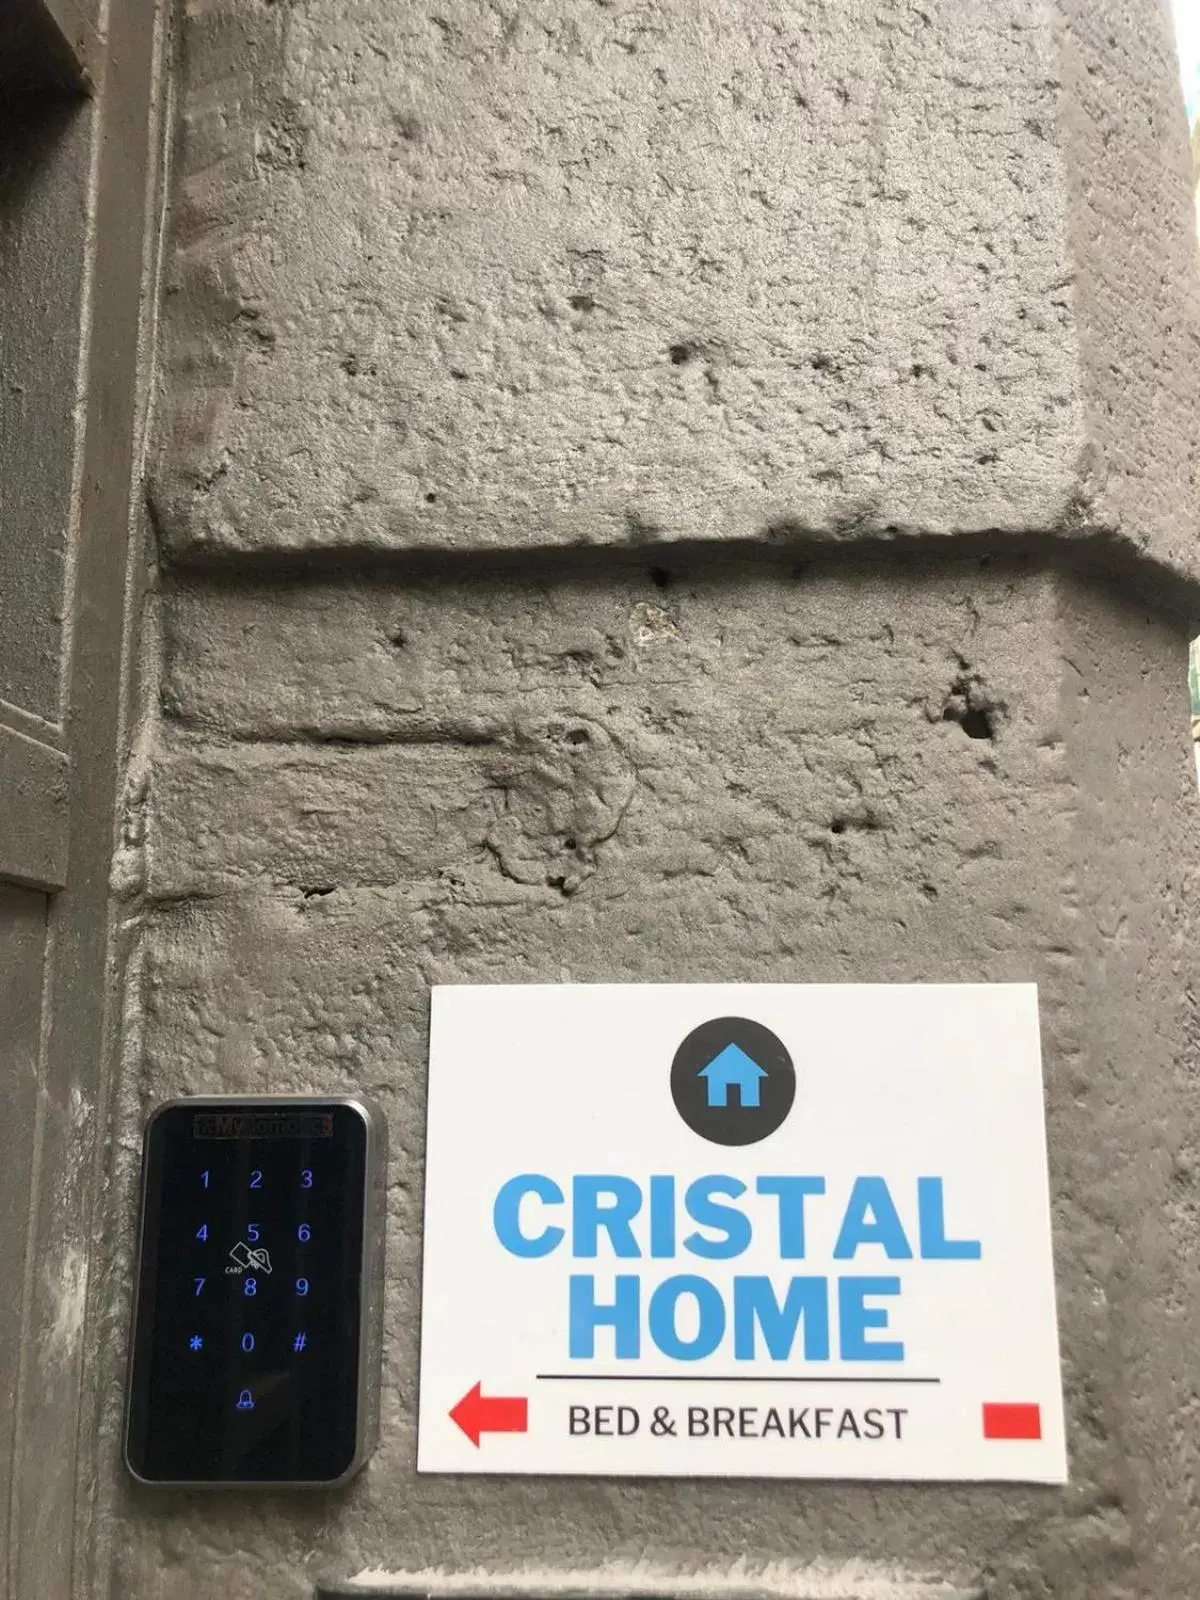 Property building in Cristal Home